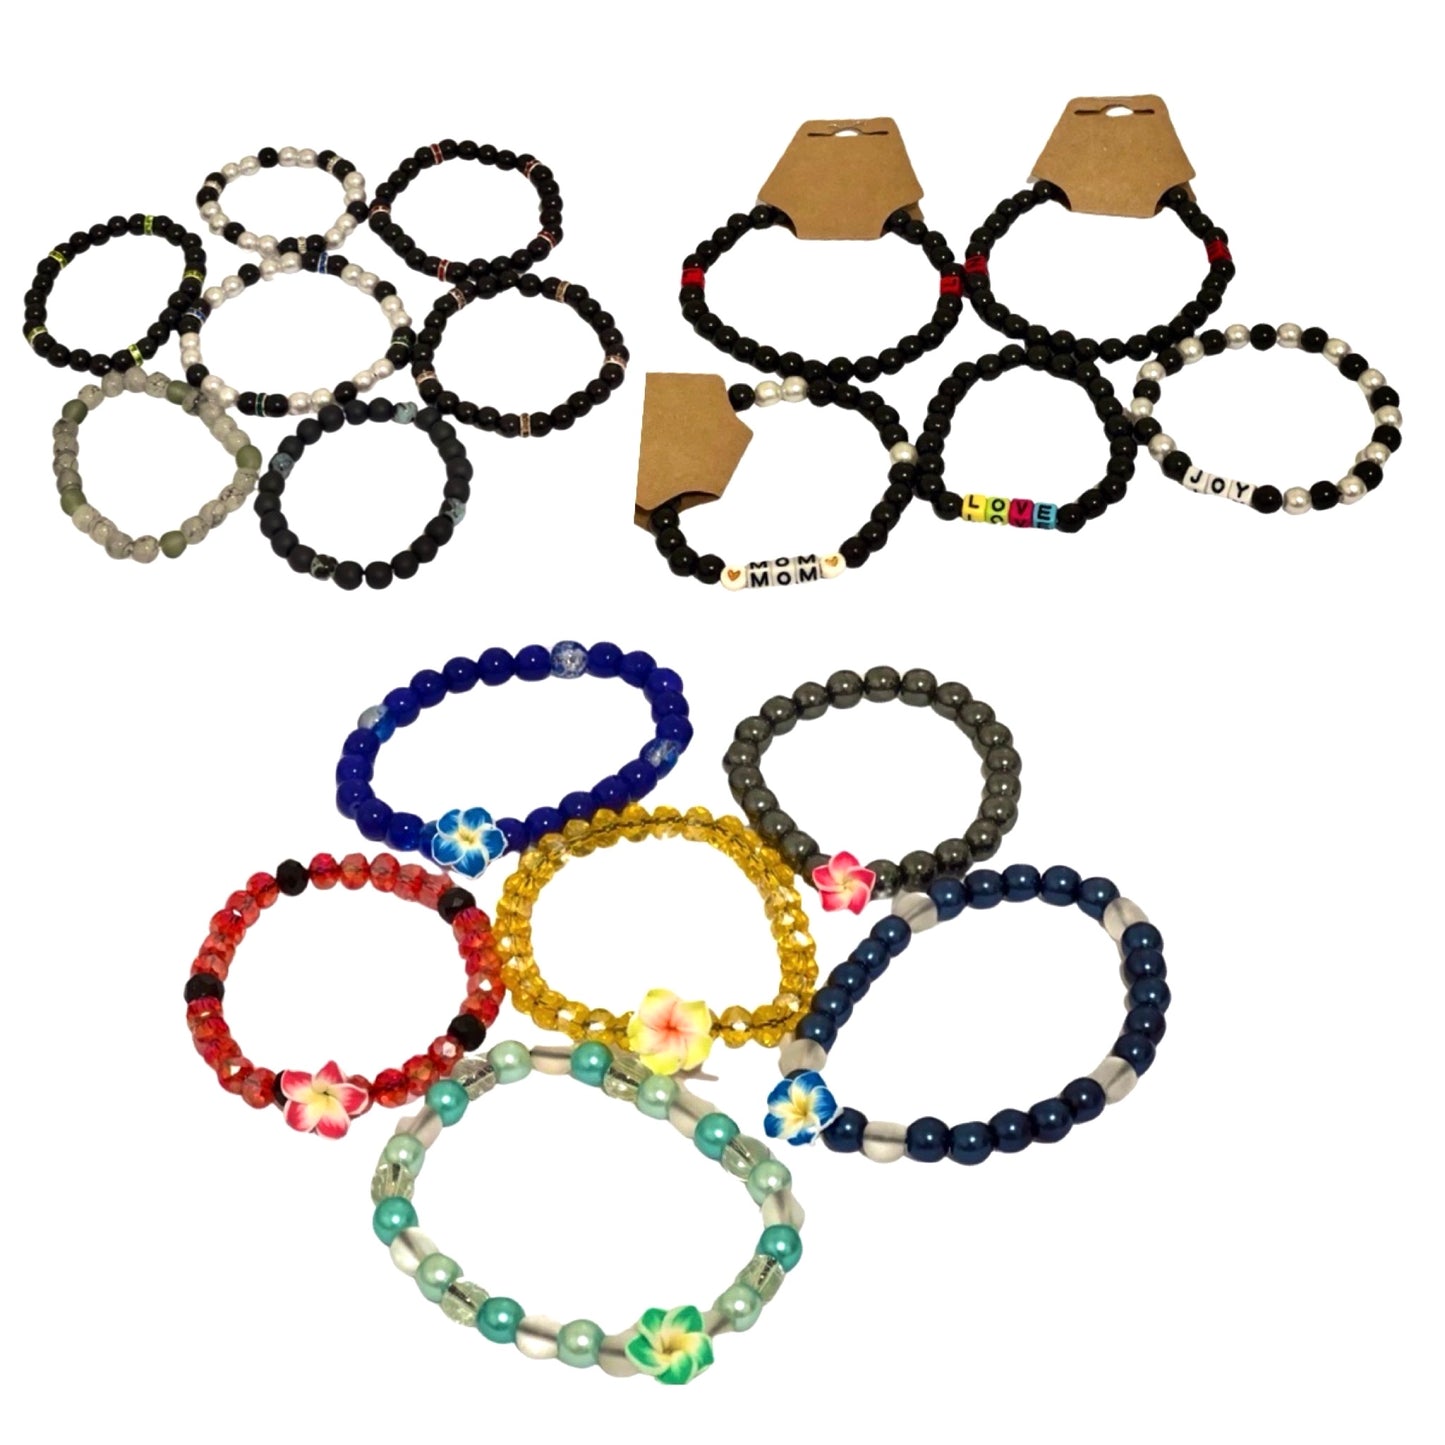 25 or 55 stretchable bracelet wholesale set. Assorted colors and styles